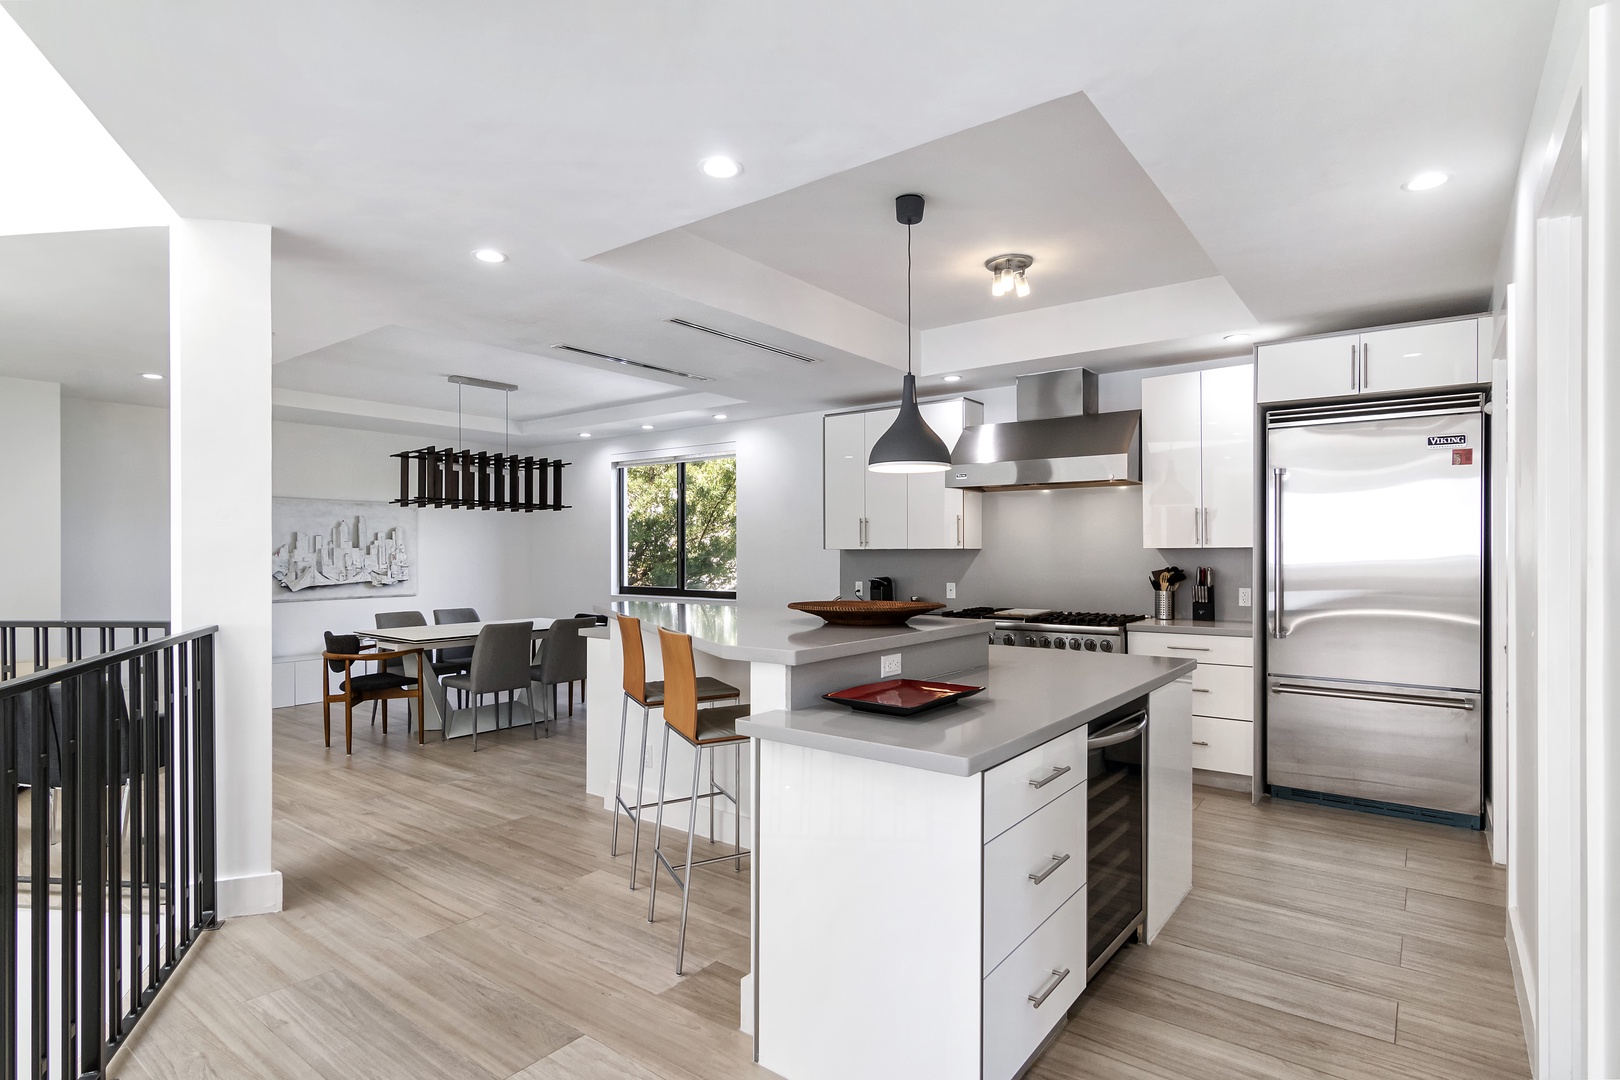 The open, modern kitchen offers ample space & all the comforts of home